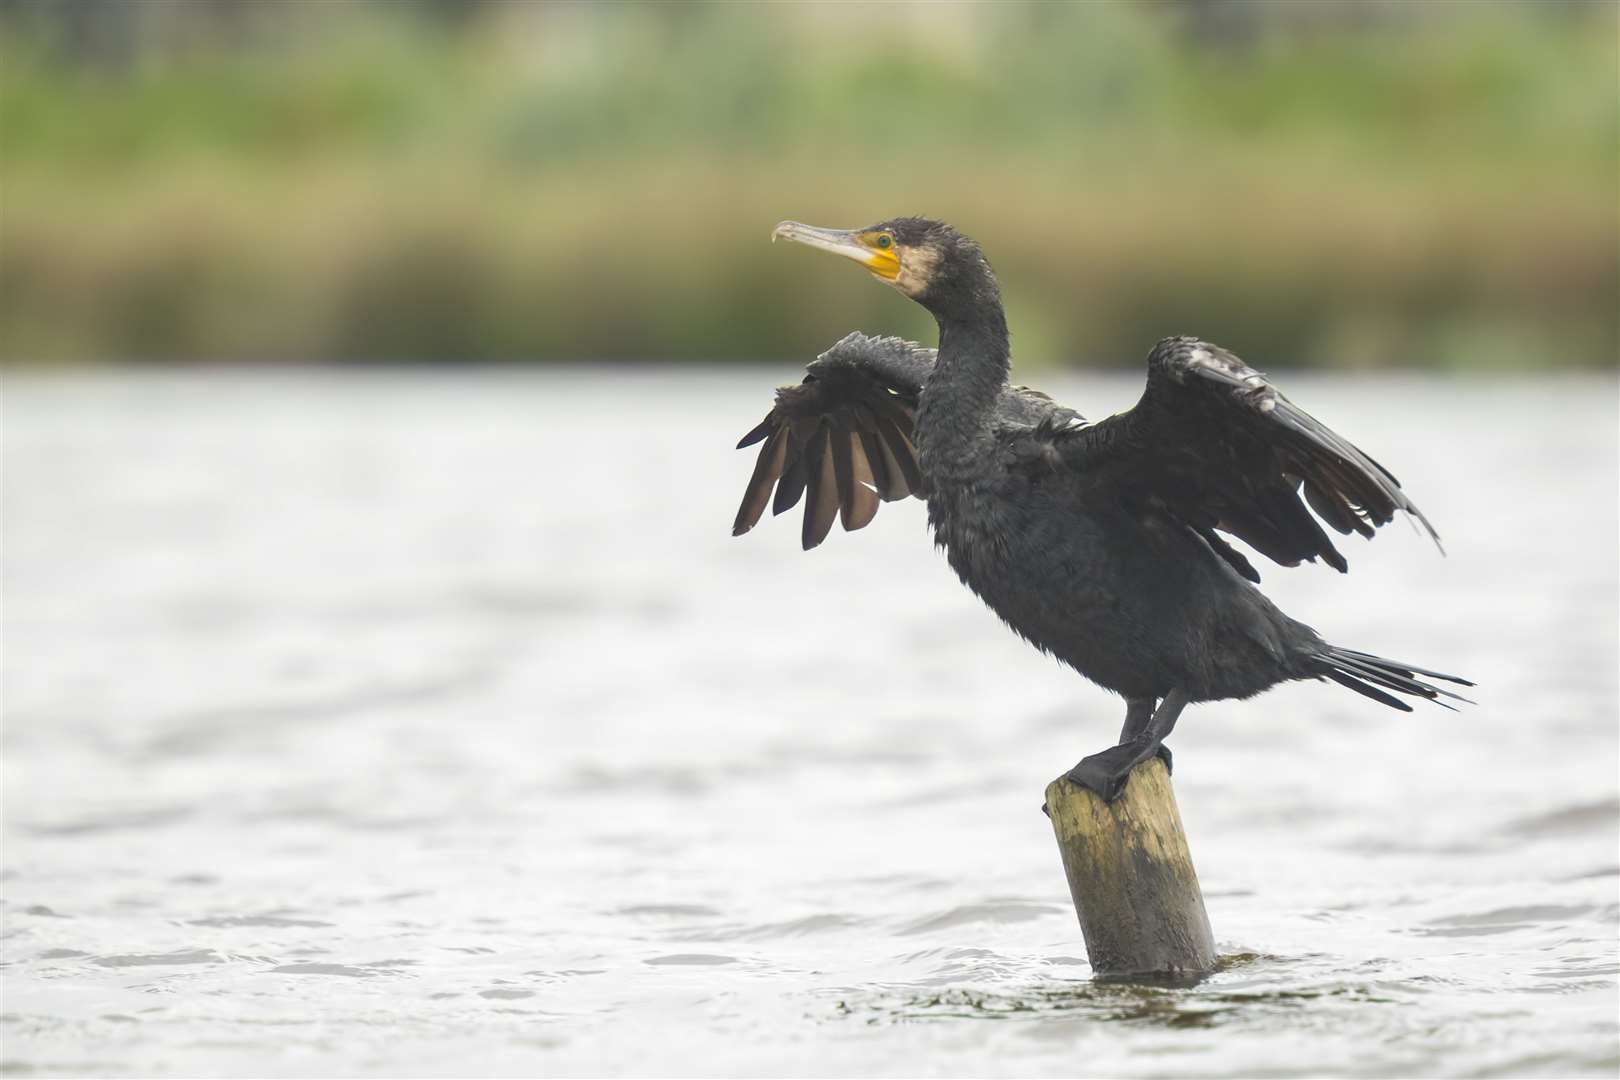 Anyone for cormorant soup...?